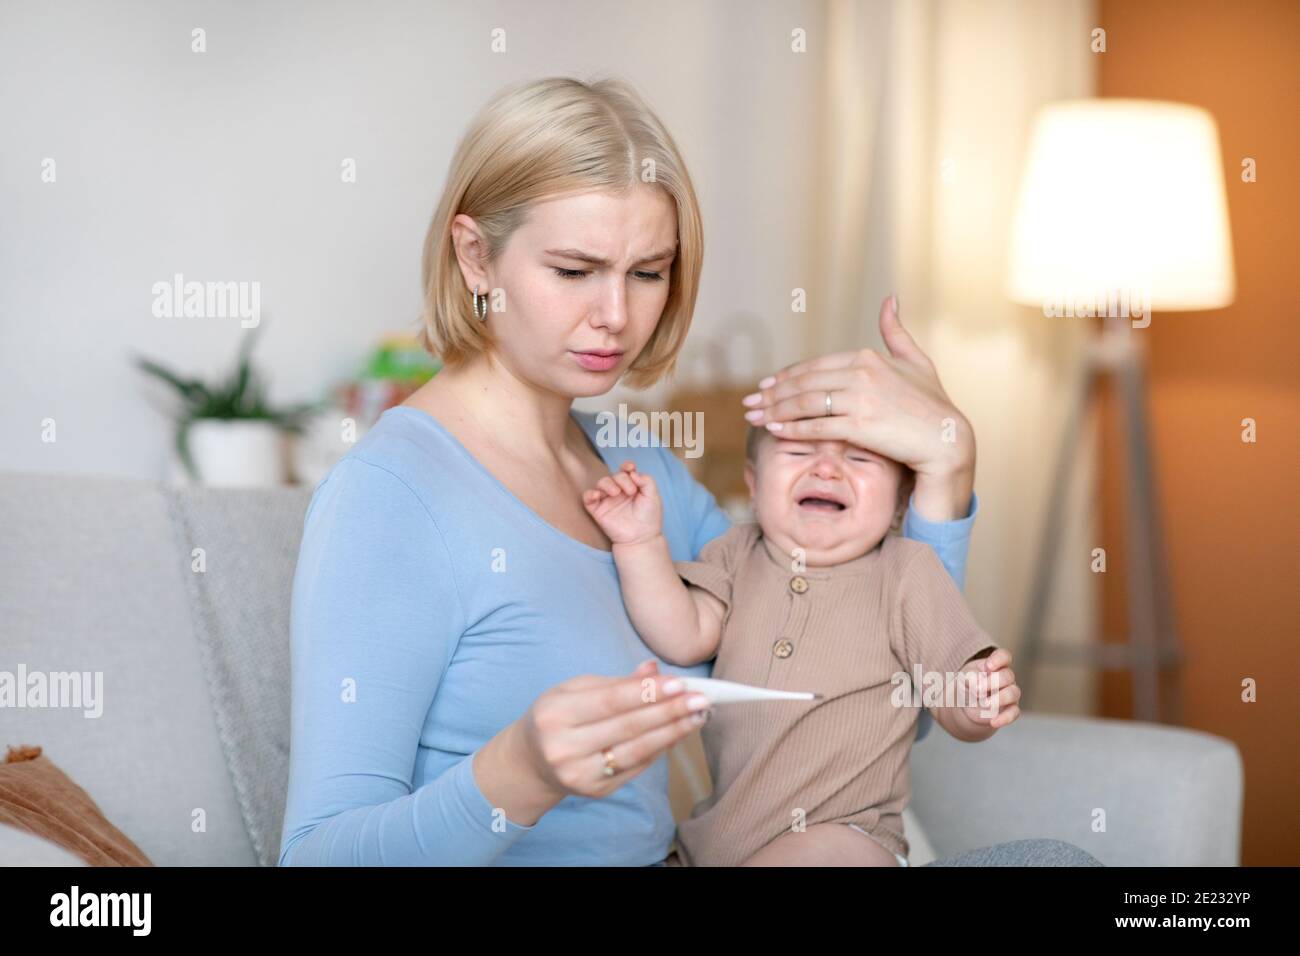 Worried mother takes temperature to sick crying baby at home Stock Photo